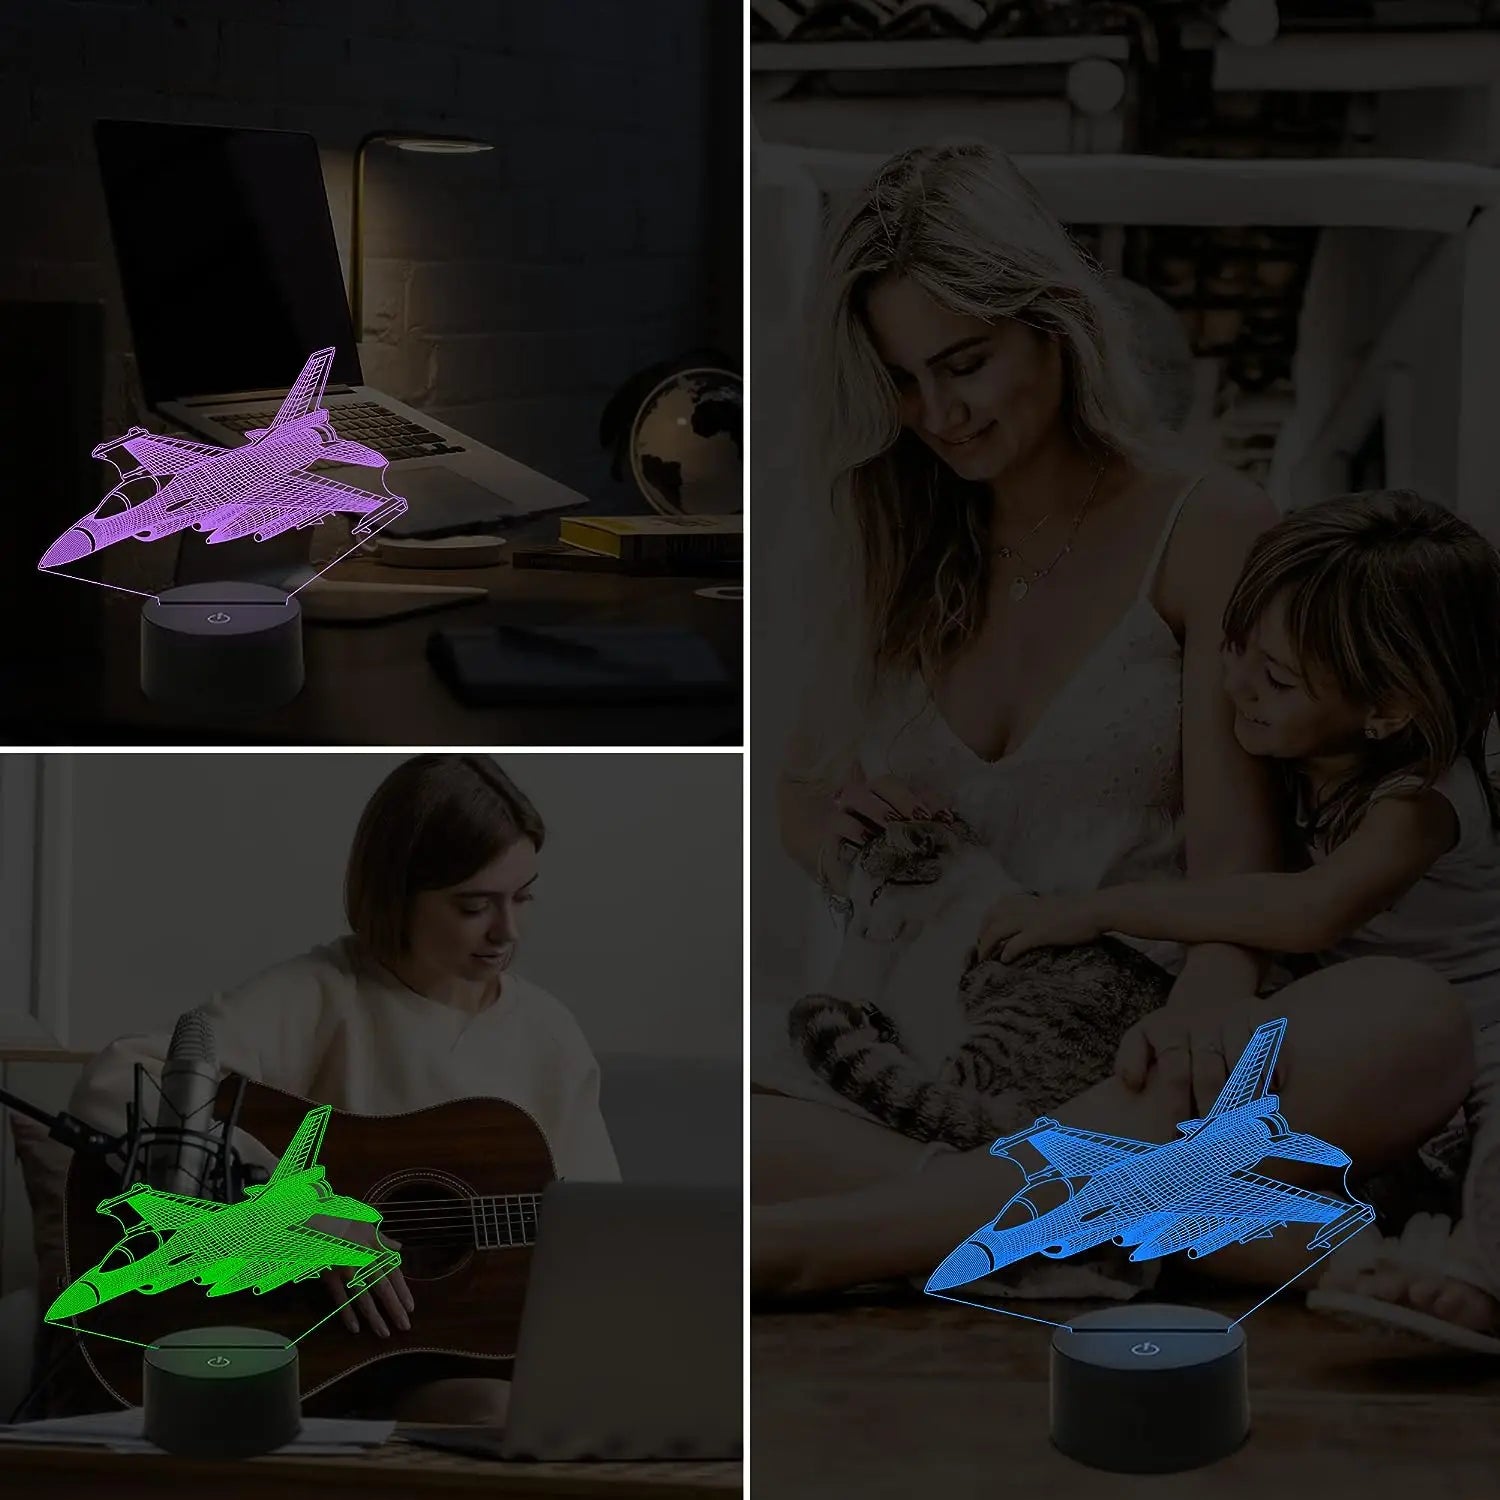 3D Visual Airplane Night Light Aircraft Led Desk Lamp 16 Färger Byt smart Touch Remote Control Led Bedside Table Desk Lamp